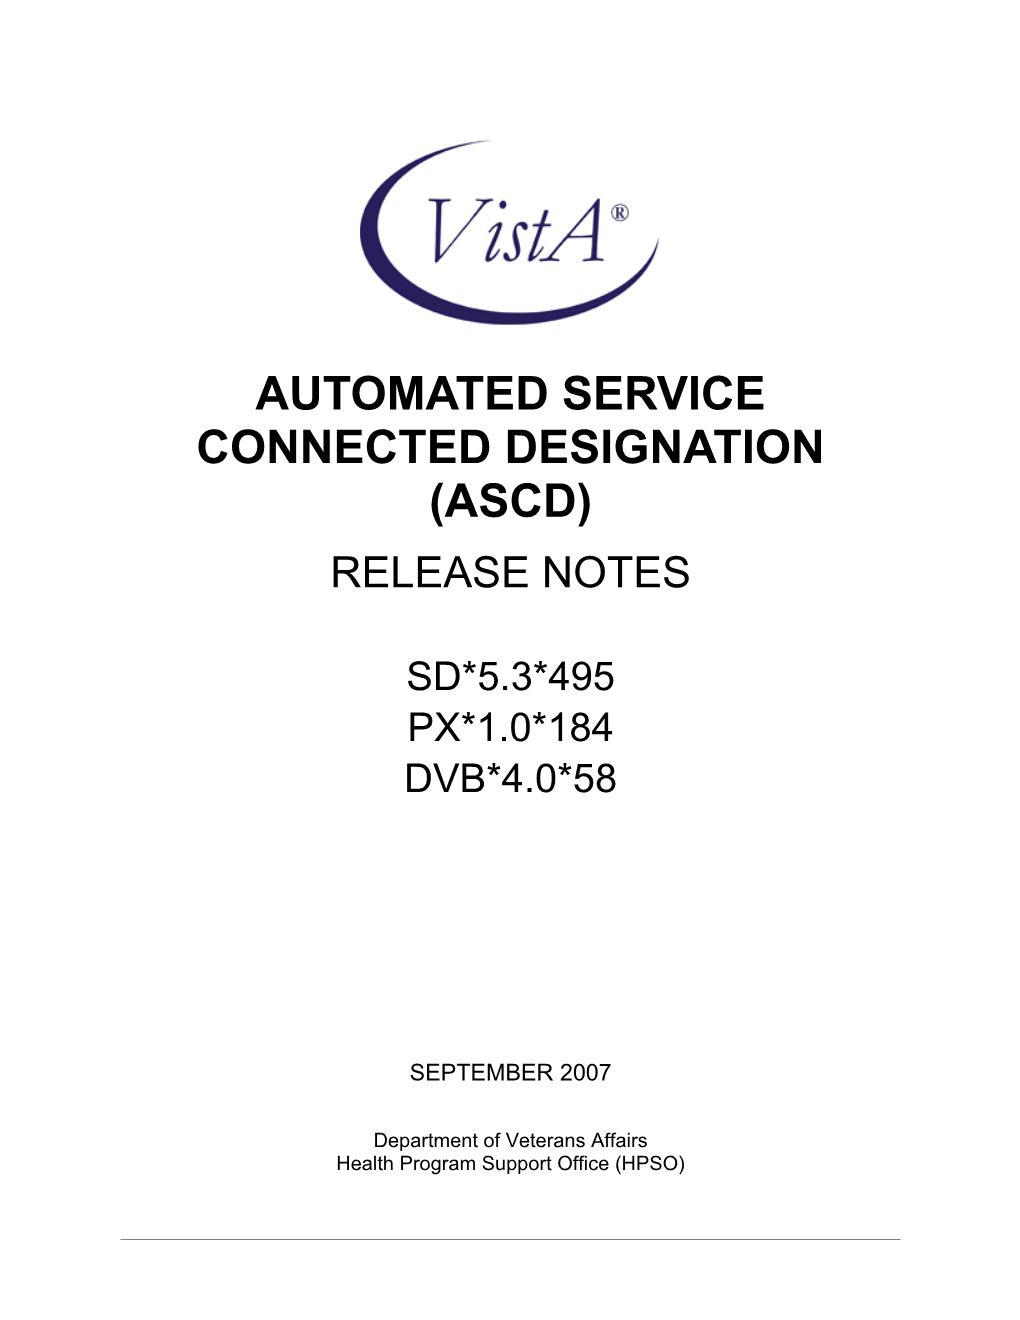 Automated Service Connected Designation (ASCD)